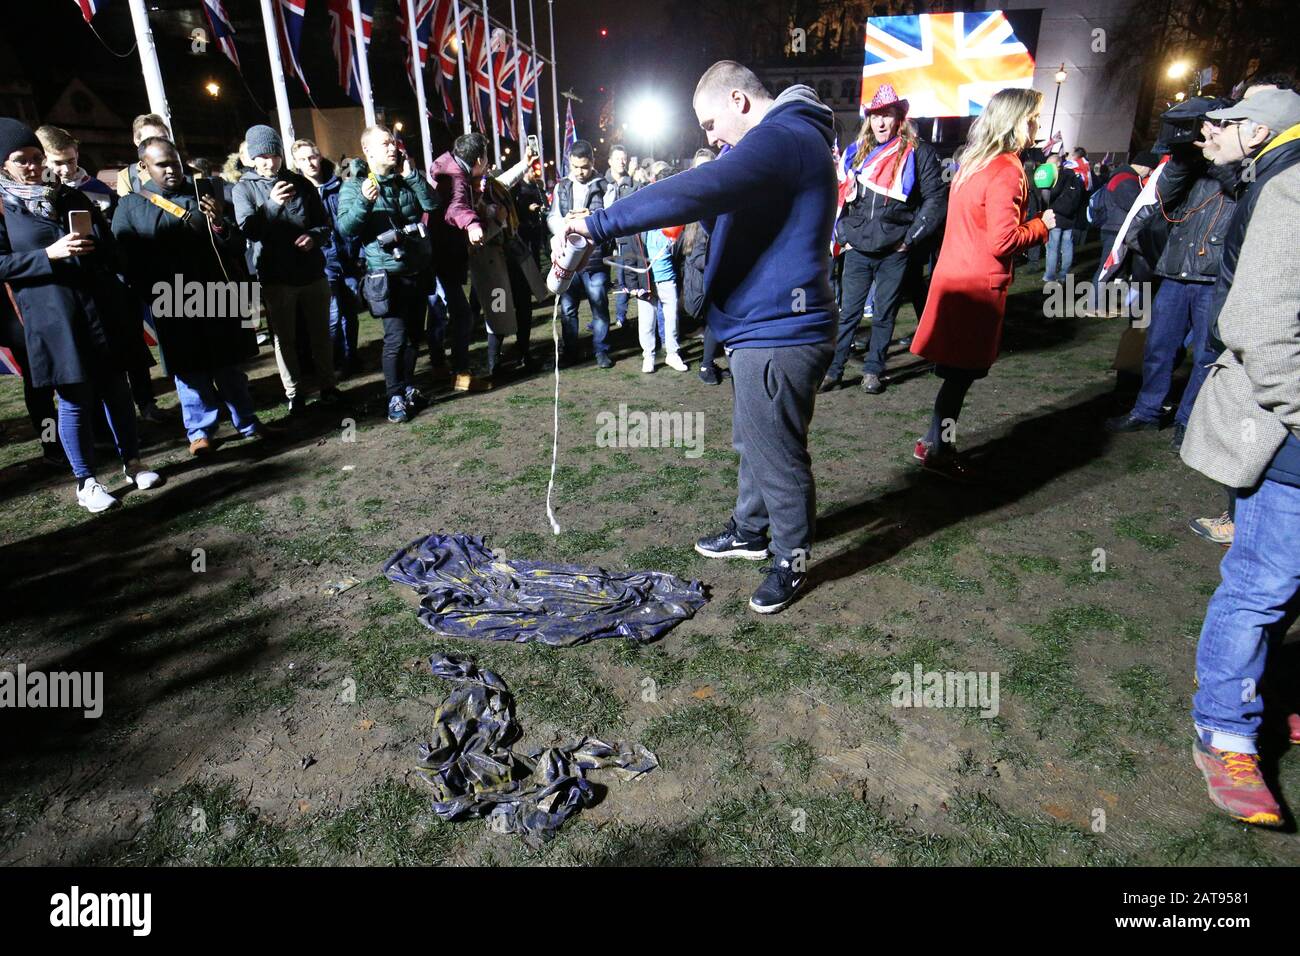 A pro-Brexit supporter pours beer onto an EU flag in Parliament Square, London, ahead of the UK leaving the European Union at 11pm on Friday. Stock Photo